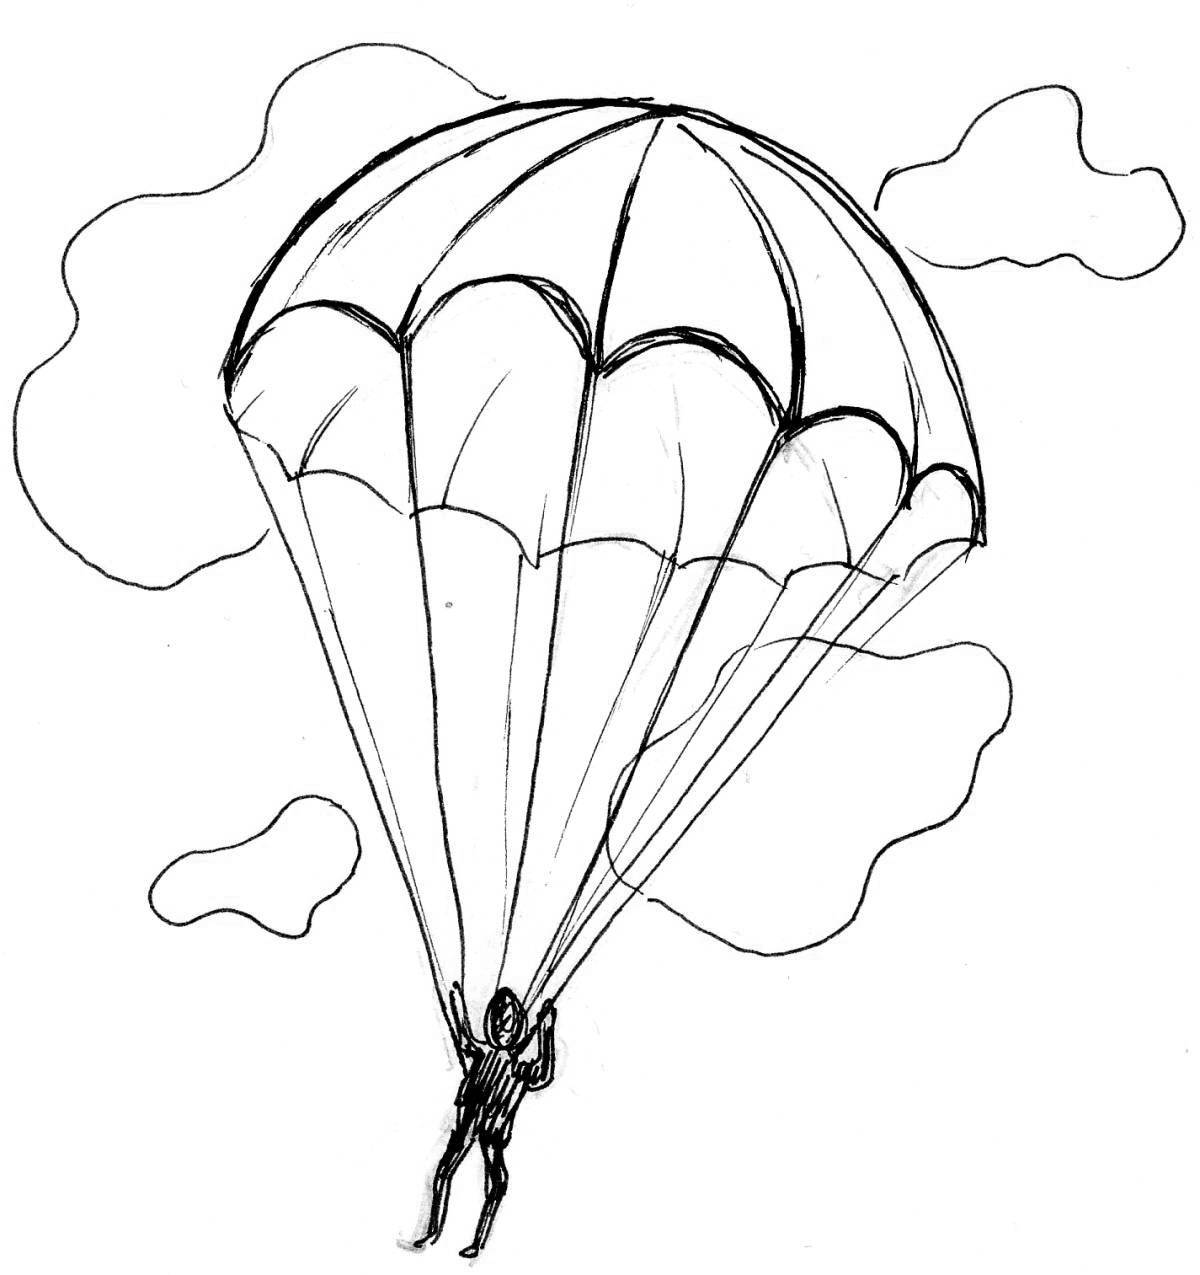 Cute parachute coloring book for kids